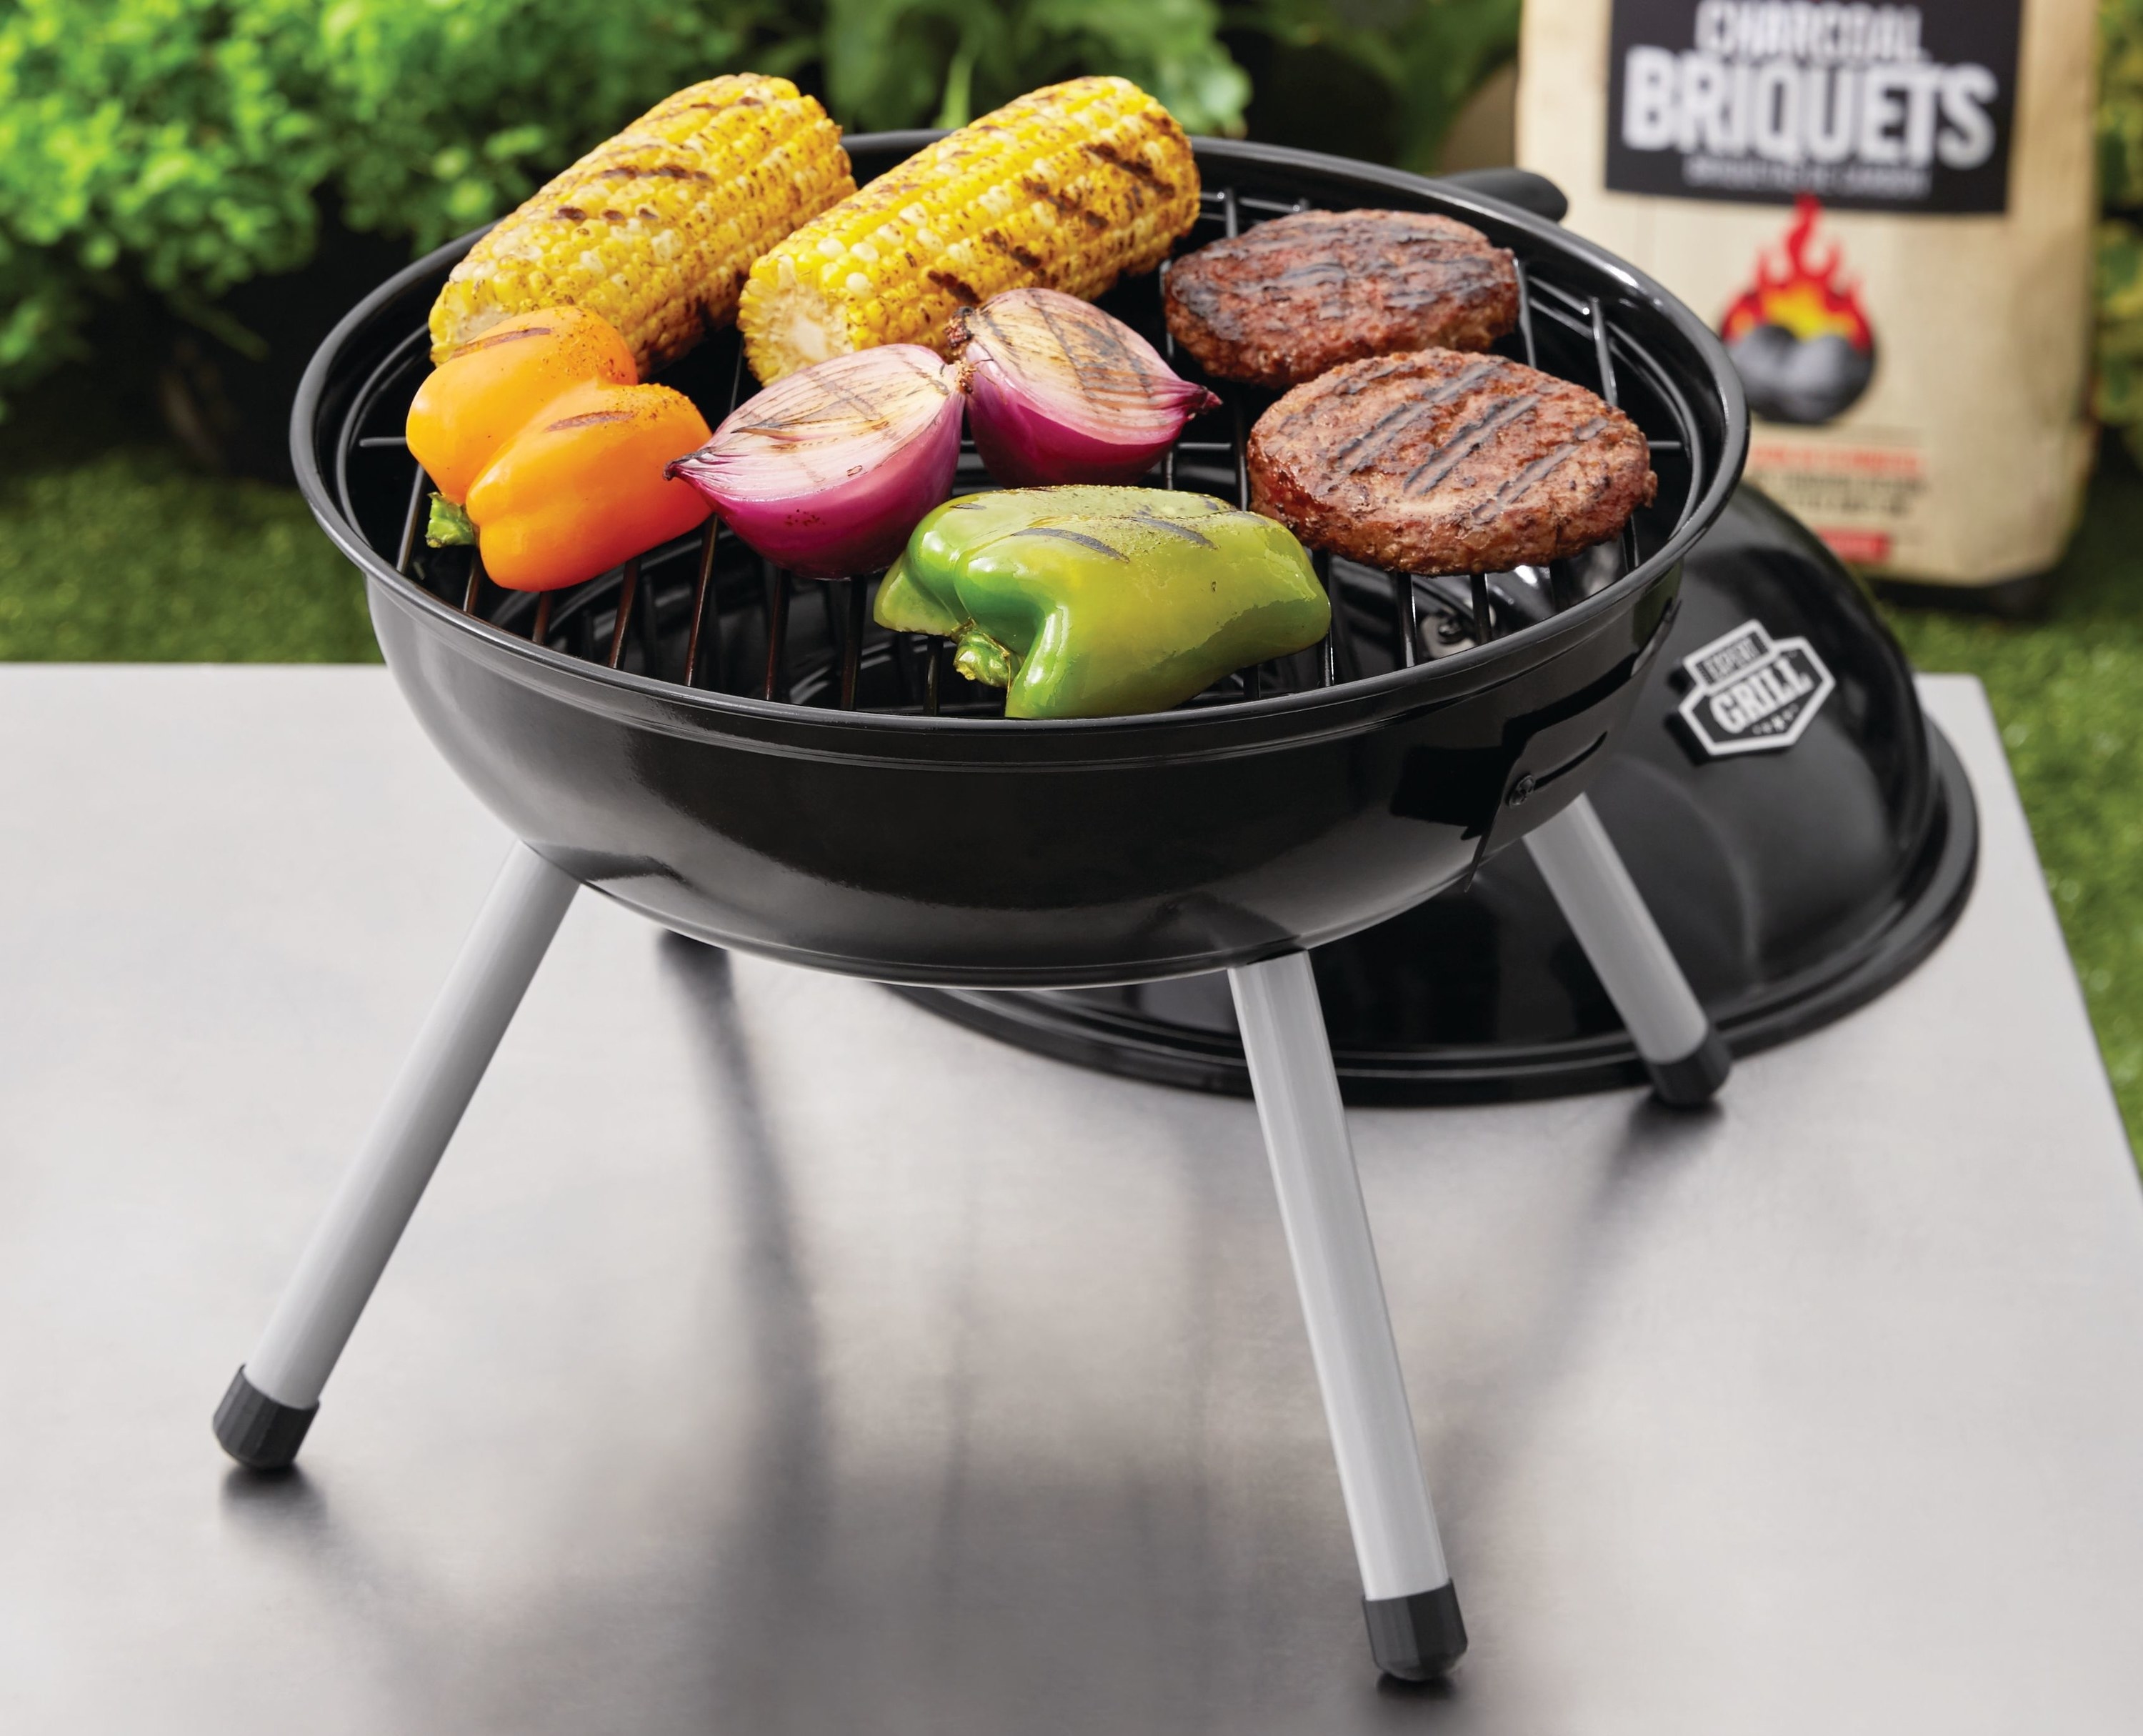 the charcoal grill on a table, grilling patties and veggies